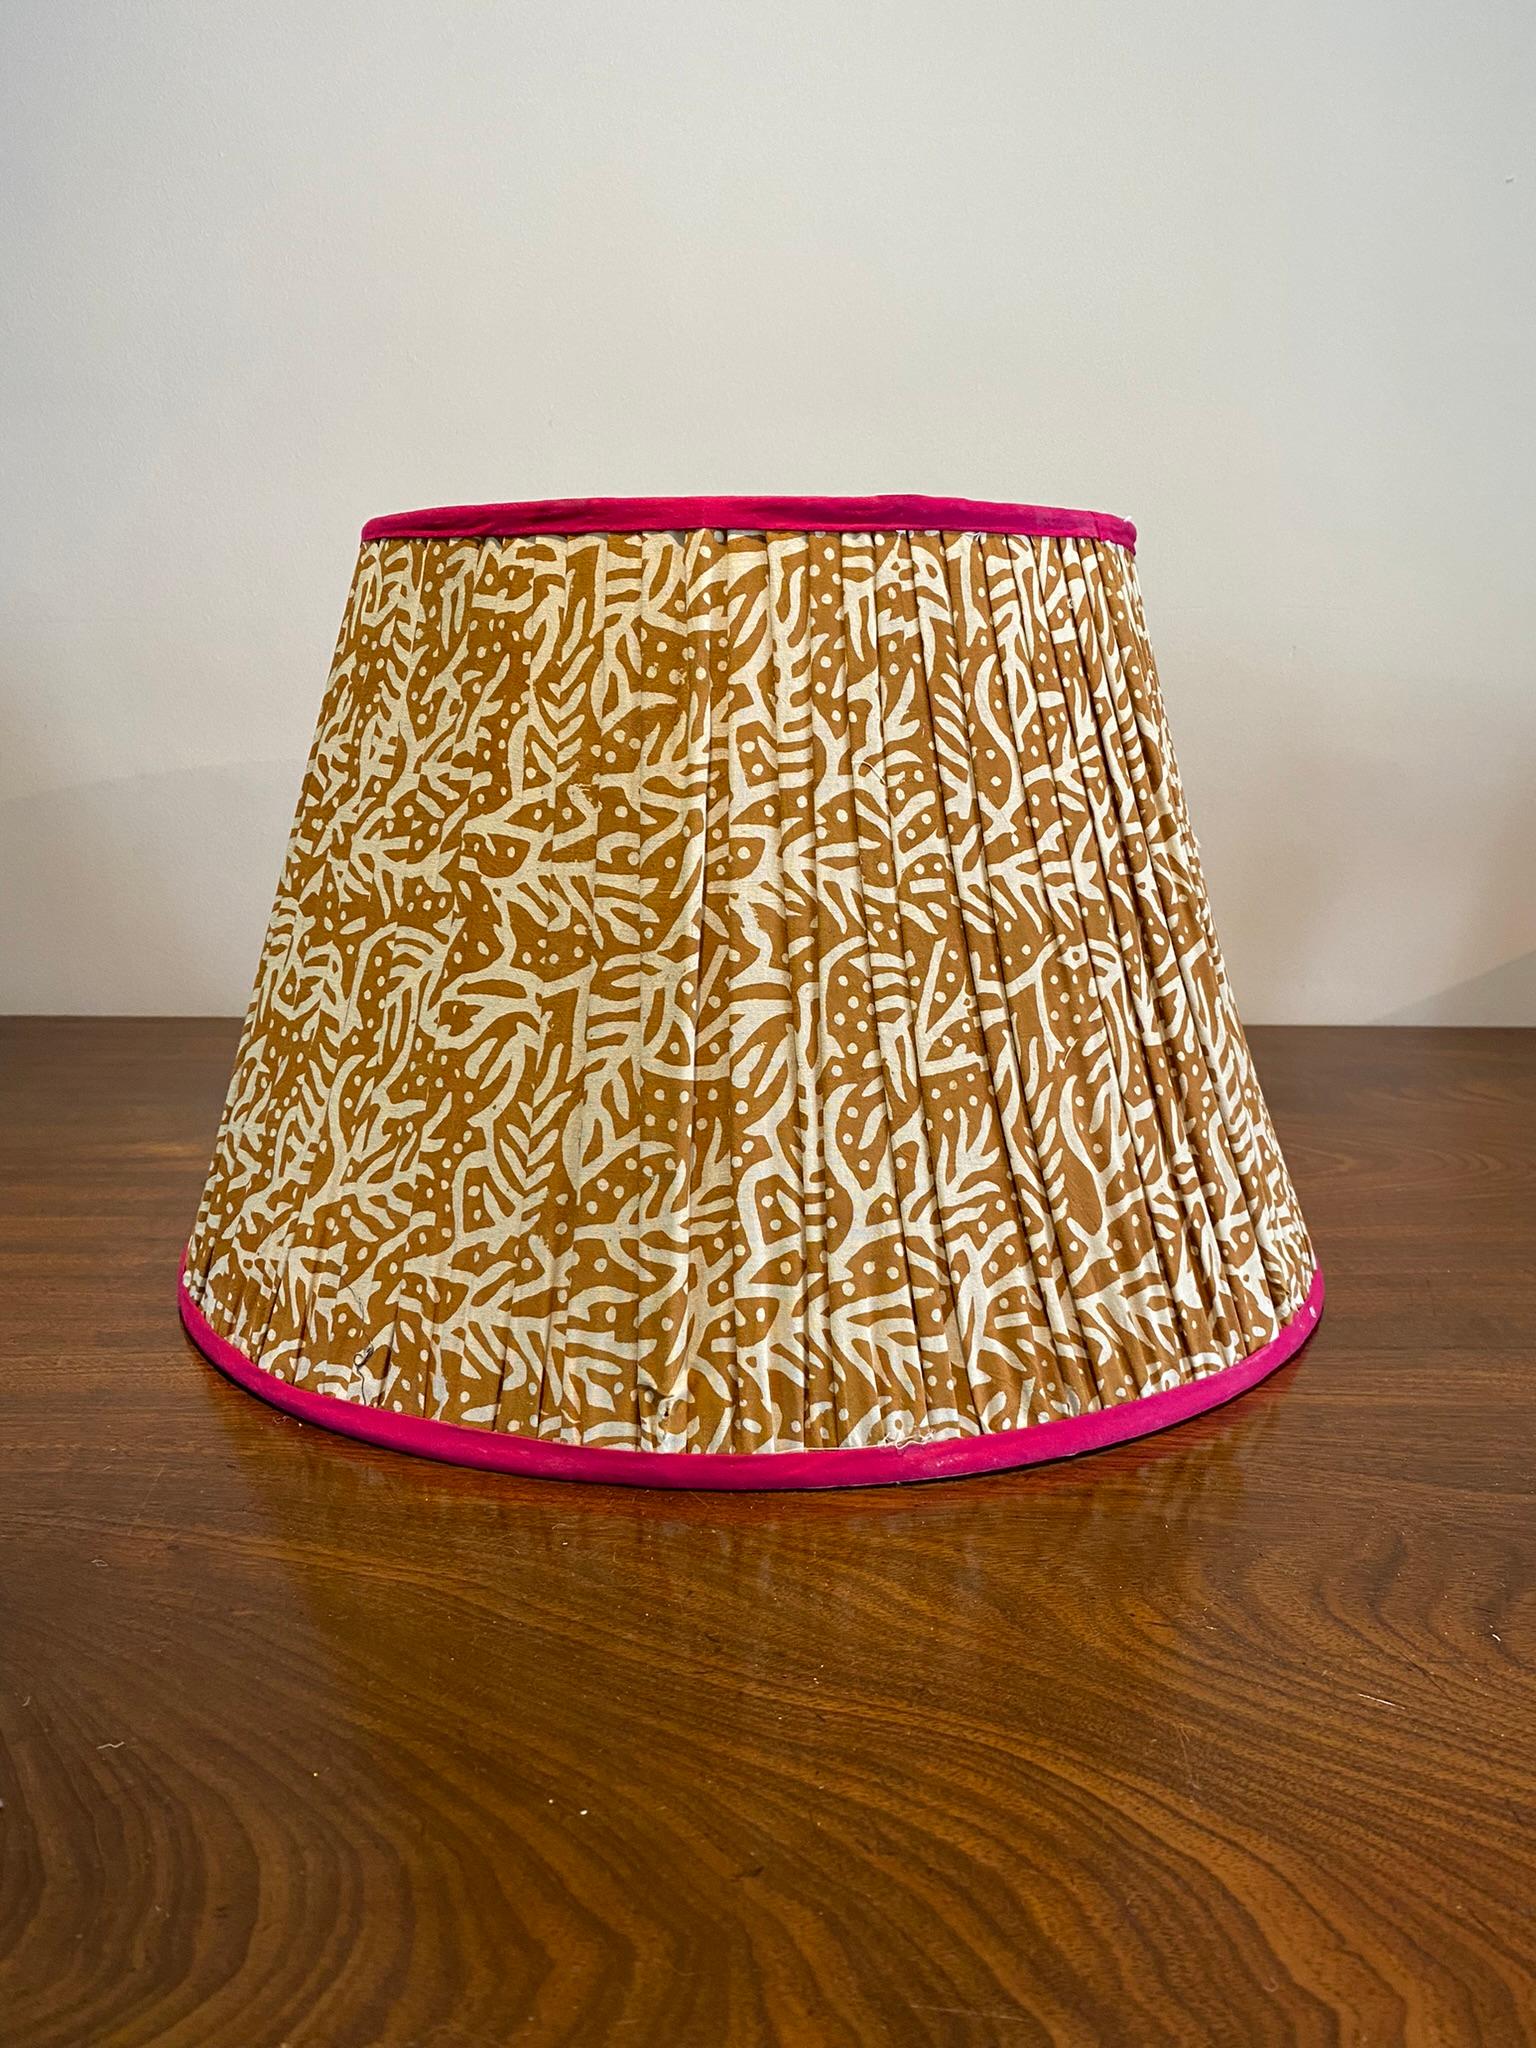 18” Indian Sari lampshade with Duplex Fitting.

These are handmade lampshades made from Indian sari silks and cotton.

Due to the fact these shades are on display in my showroom and their delicate nature, they occasionally show signs of handling